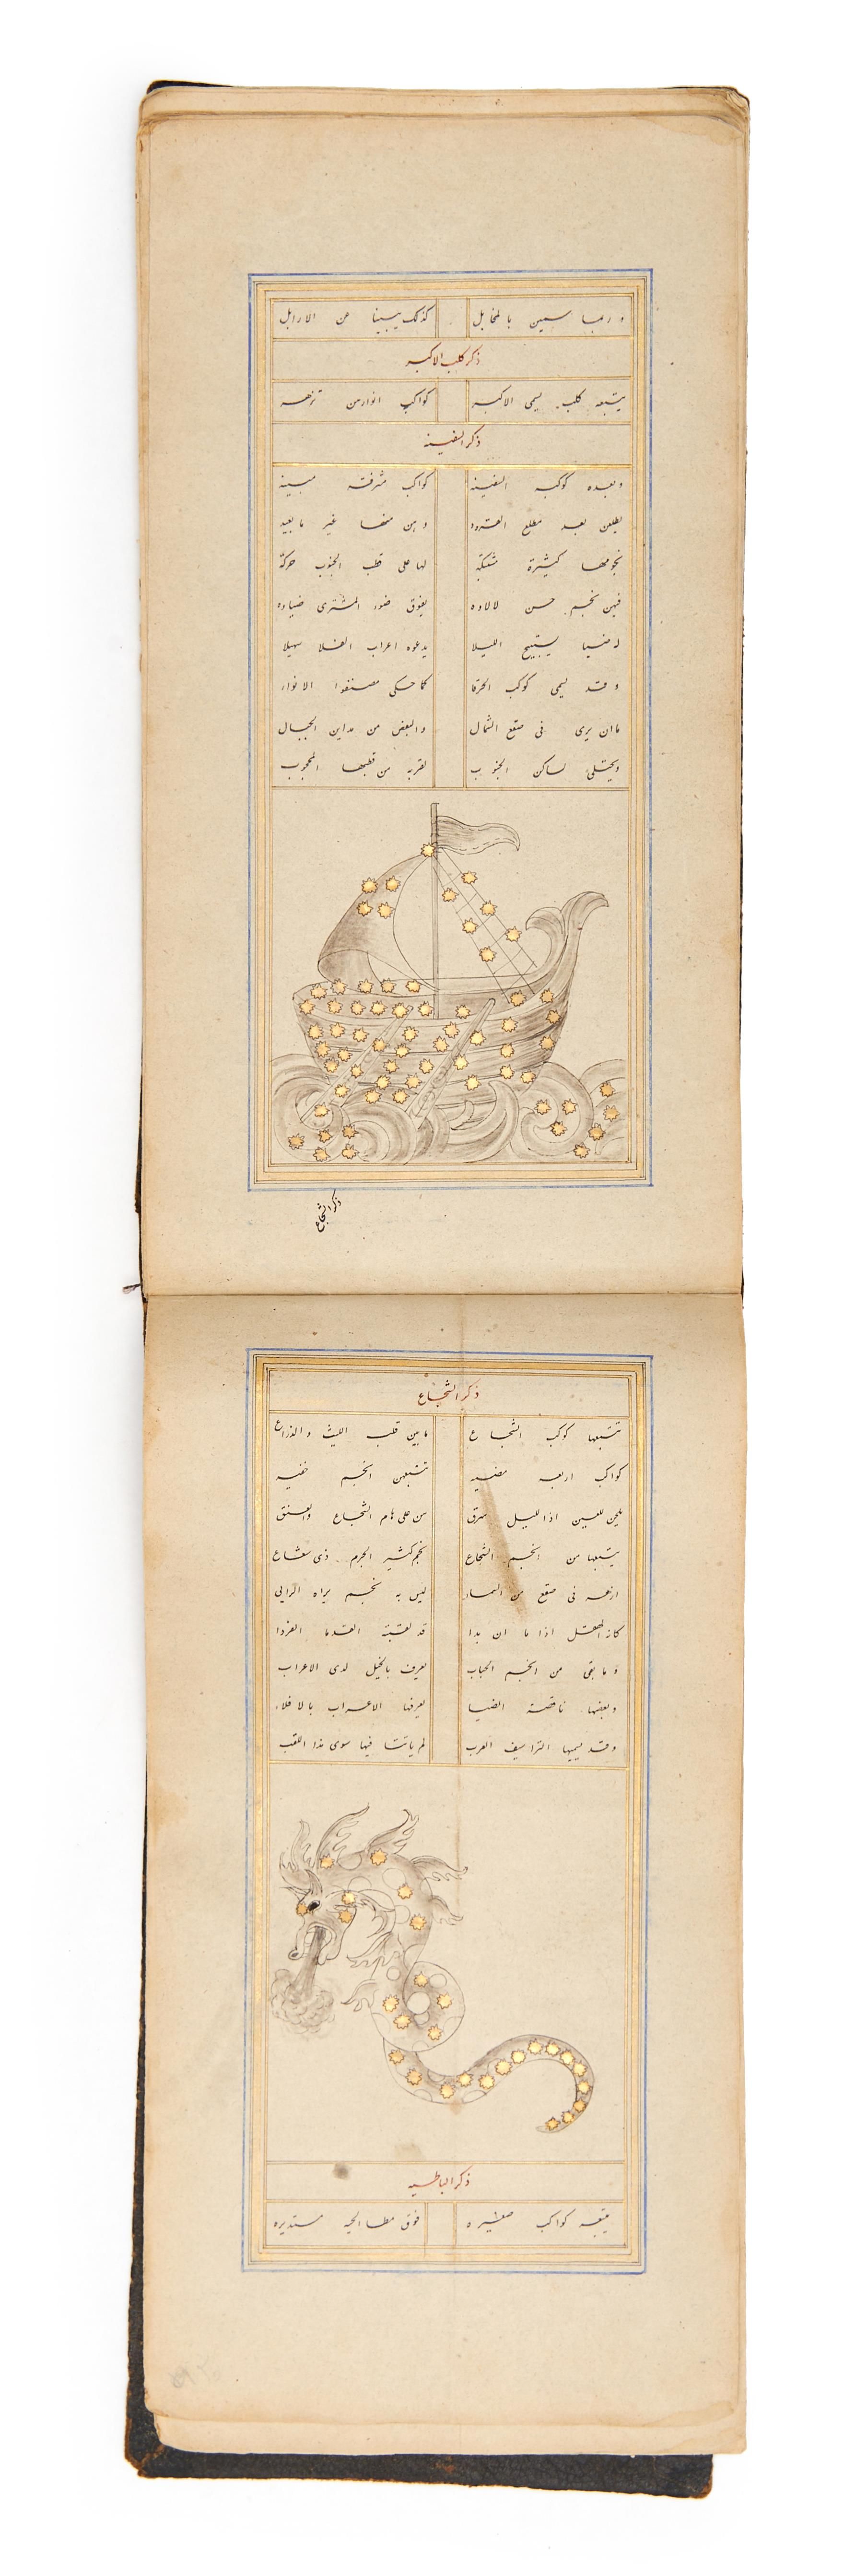 A RARE ILLUMINATED & ILLUSTRATED PERSIAN POETRY BOOK, ABD AL RAHMAN IN SUFI TEXT, LATE 17TH/ EARLY - Image 16 of 34